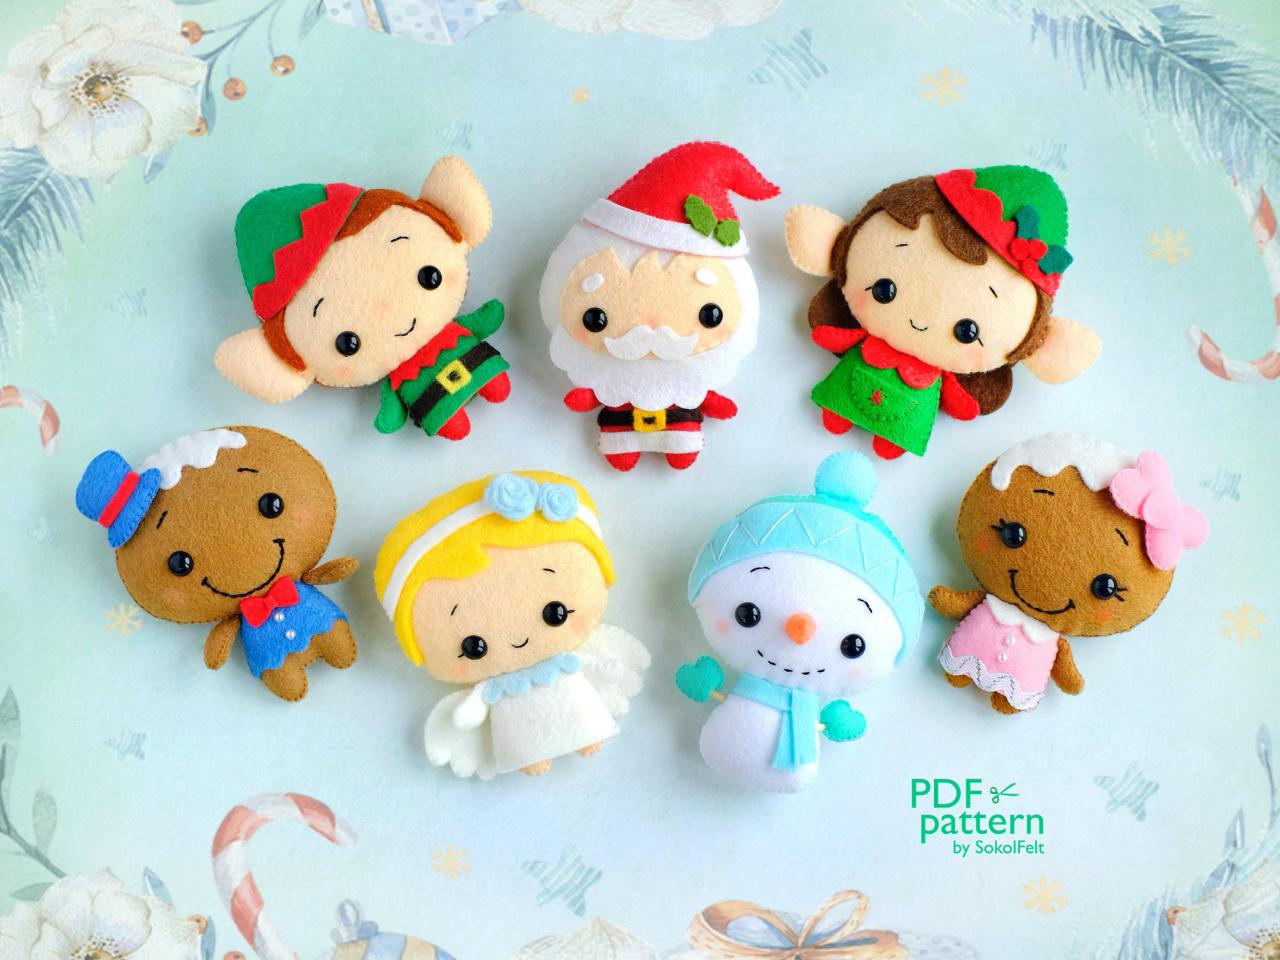 Set of 7 Felt Christmas toy sewing PDF and SVG patterns, Santa, Angel, Elf boy and girl, Snowman, Mr. and Mrs. Gingerbread, Felt baby mobile